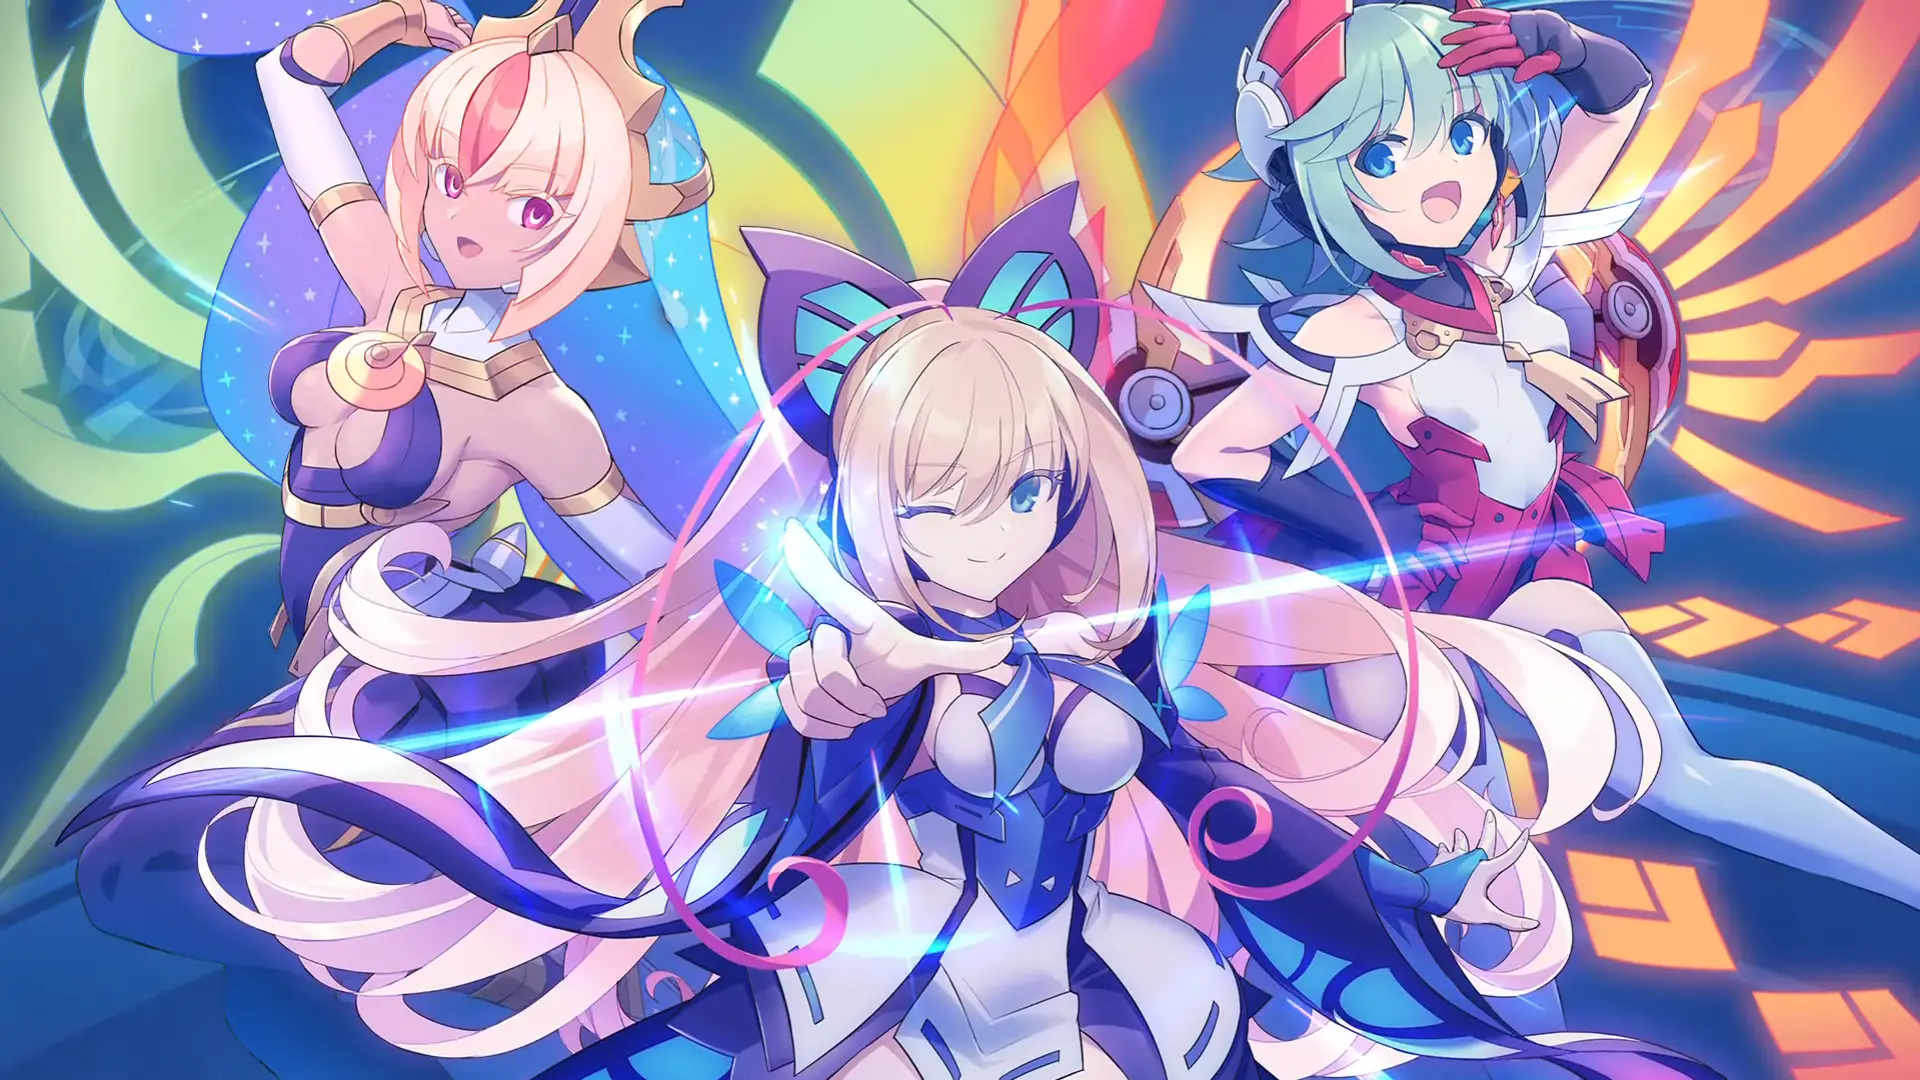 GUNVOLT RECORDS Cychronicle Reveals New Gameplay Video Featuring “Stratosphere”